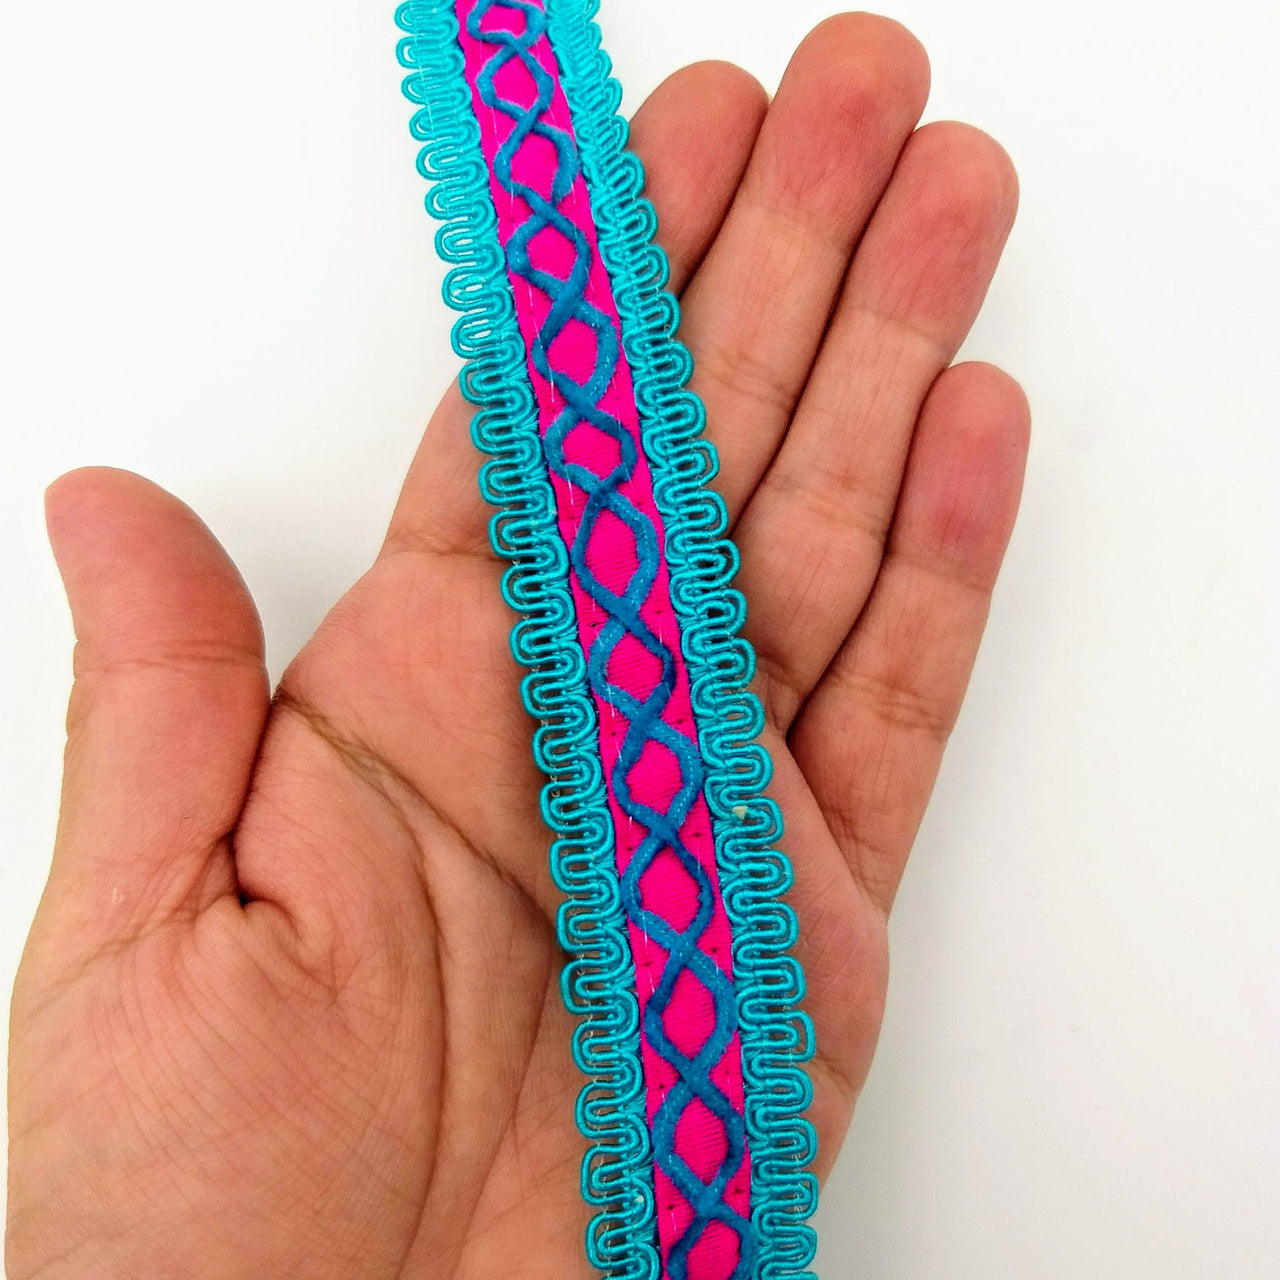 Fuchsia Pink Cotton Fabric Lace Trim with Blue Thread Embroidery, Trim By 3 Yards, Craft Decorative Ribbon